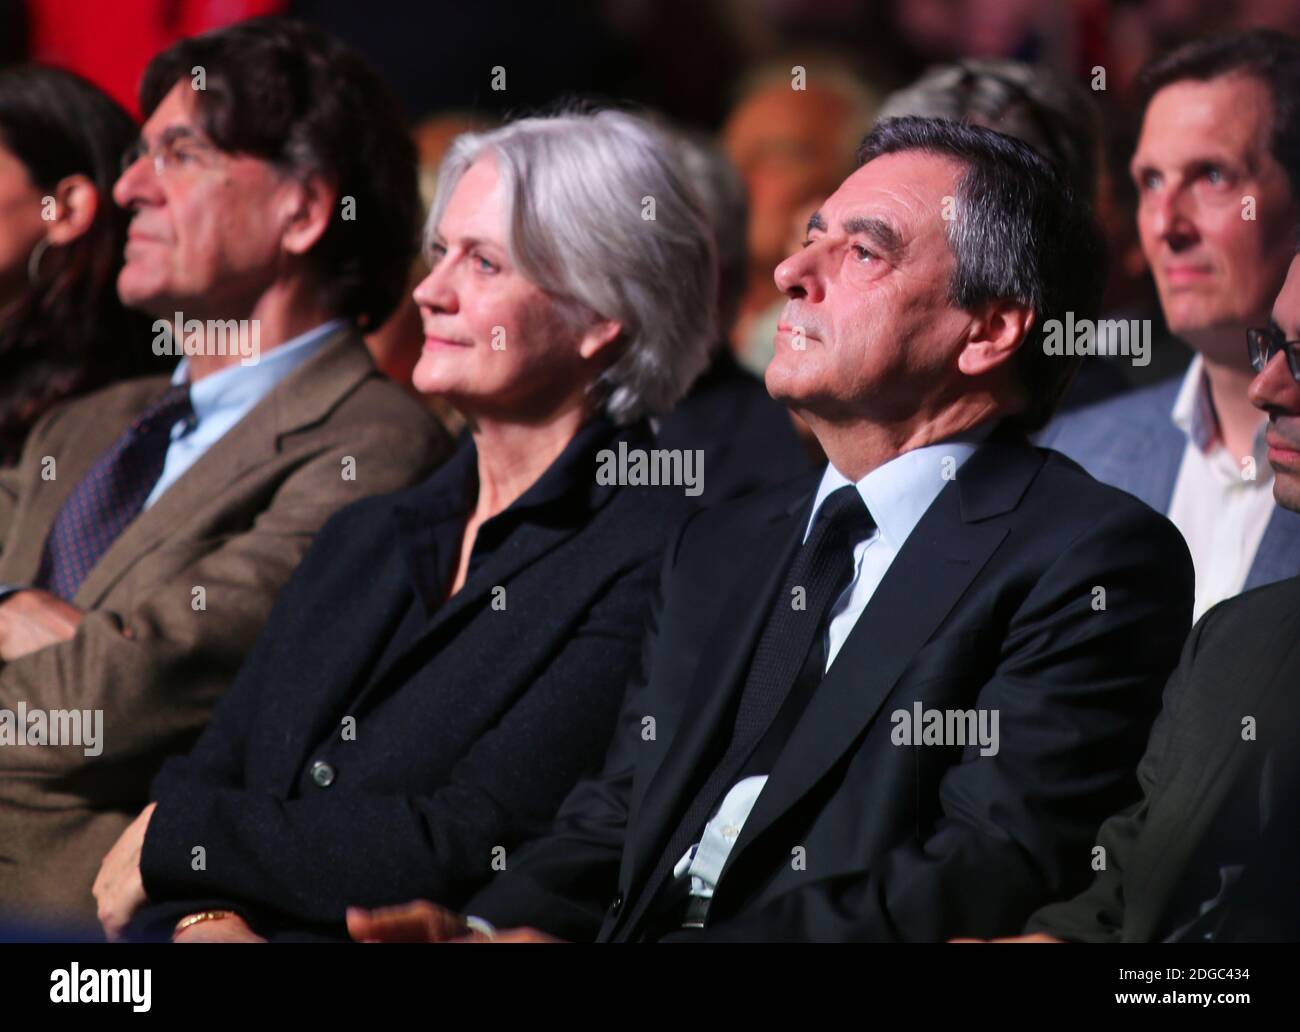 L-R) Luc Ferry, Penelope Fillon and former French Prime Minister and Les  Republicains (LR) candidate for the upcoming presidential elections François  Fillon during a campaign meeting at Porte de Versailles in Paris,